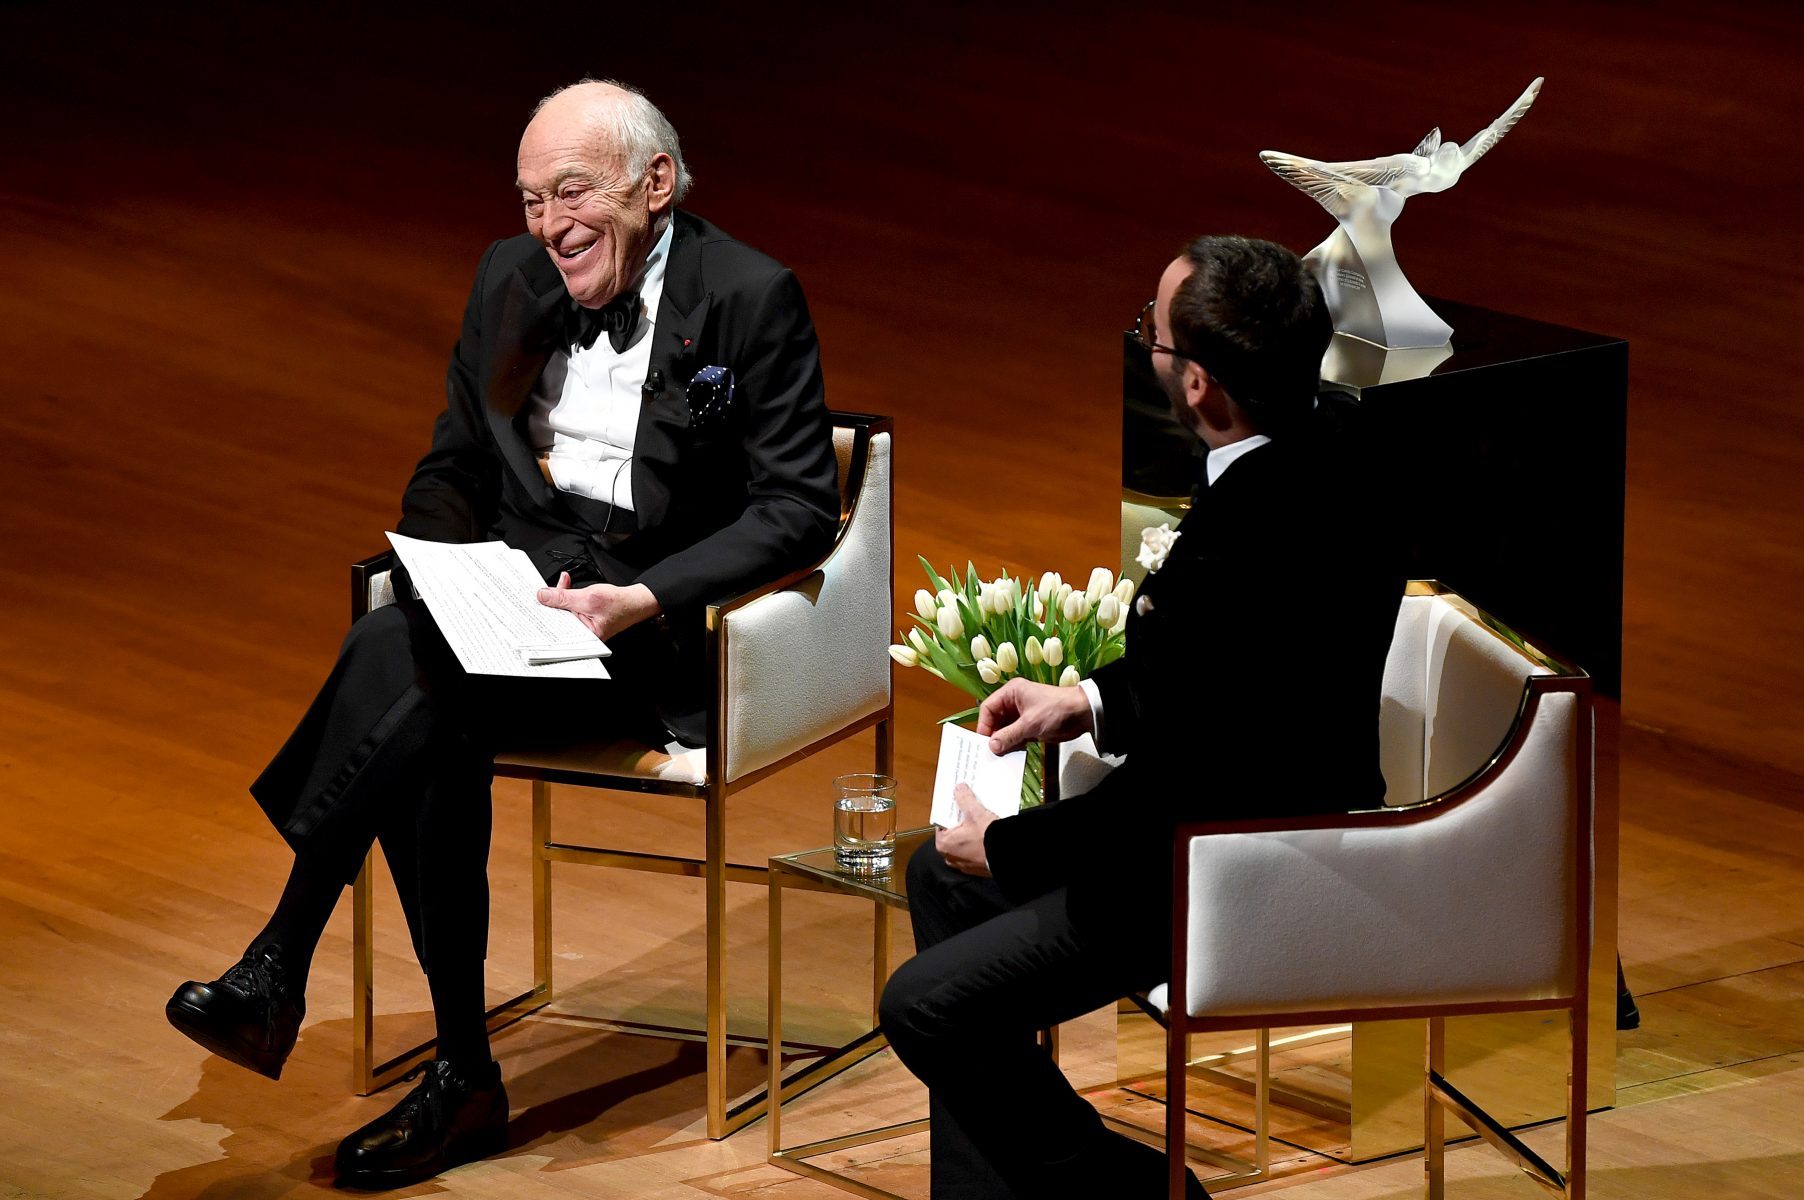 A Conversation with Leonard Lauder - A Life in Beauty, Events, Alumni,  Friends and Families